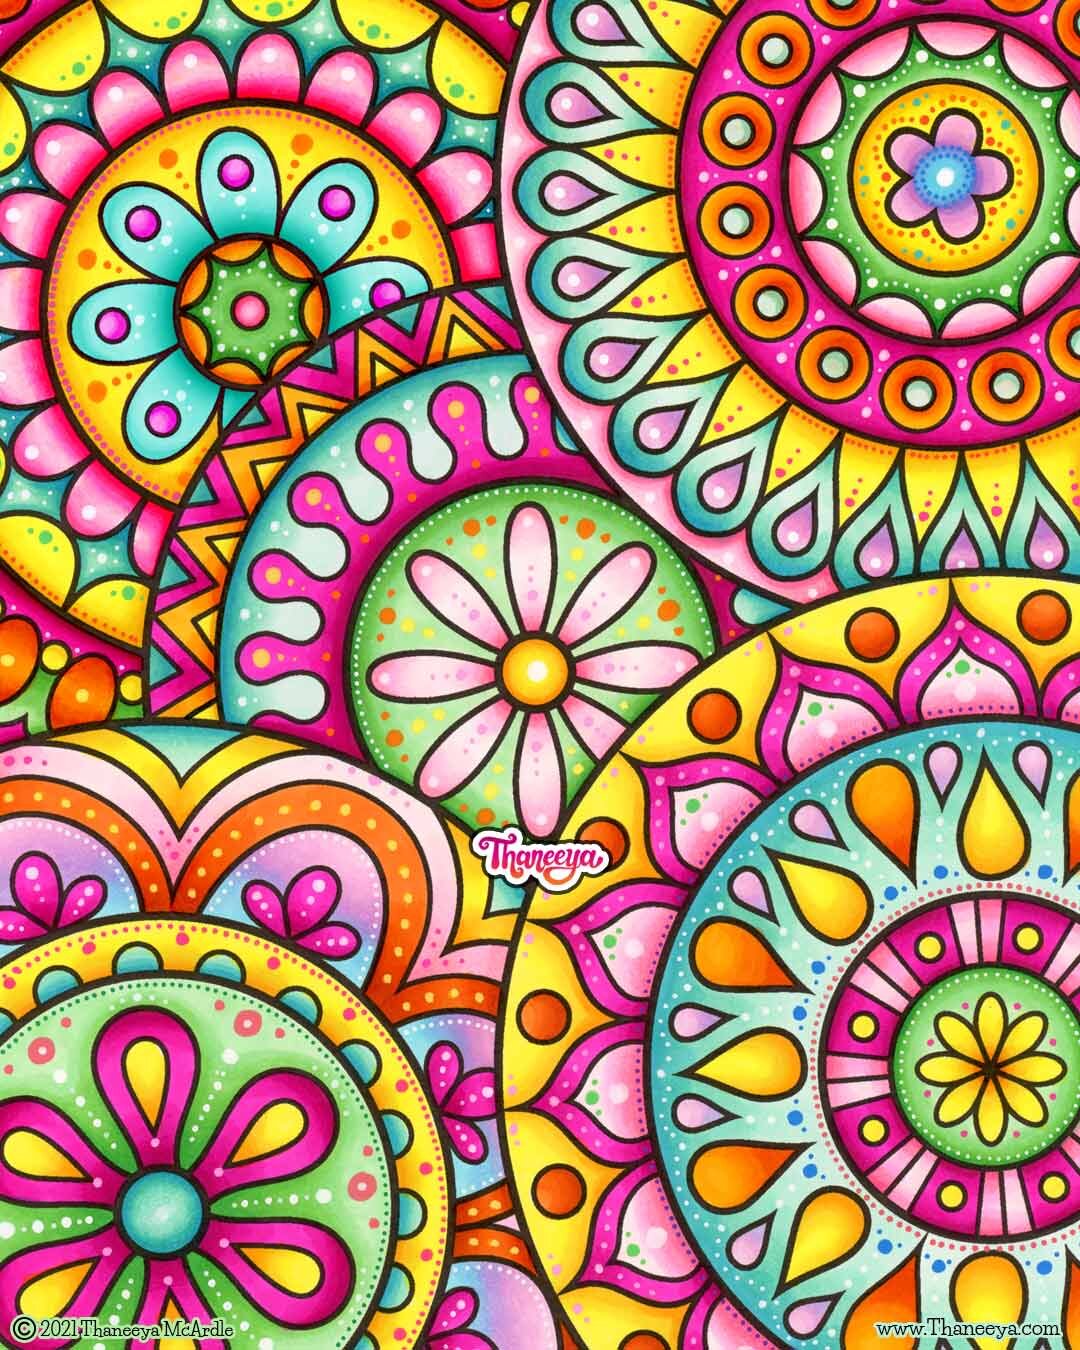 20 Best Paint By Number Printable Templates PDF for Free at Printablee   Abstract coloring pages, Pattern coloring pages, Detailed coloring pages